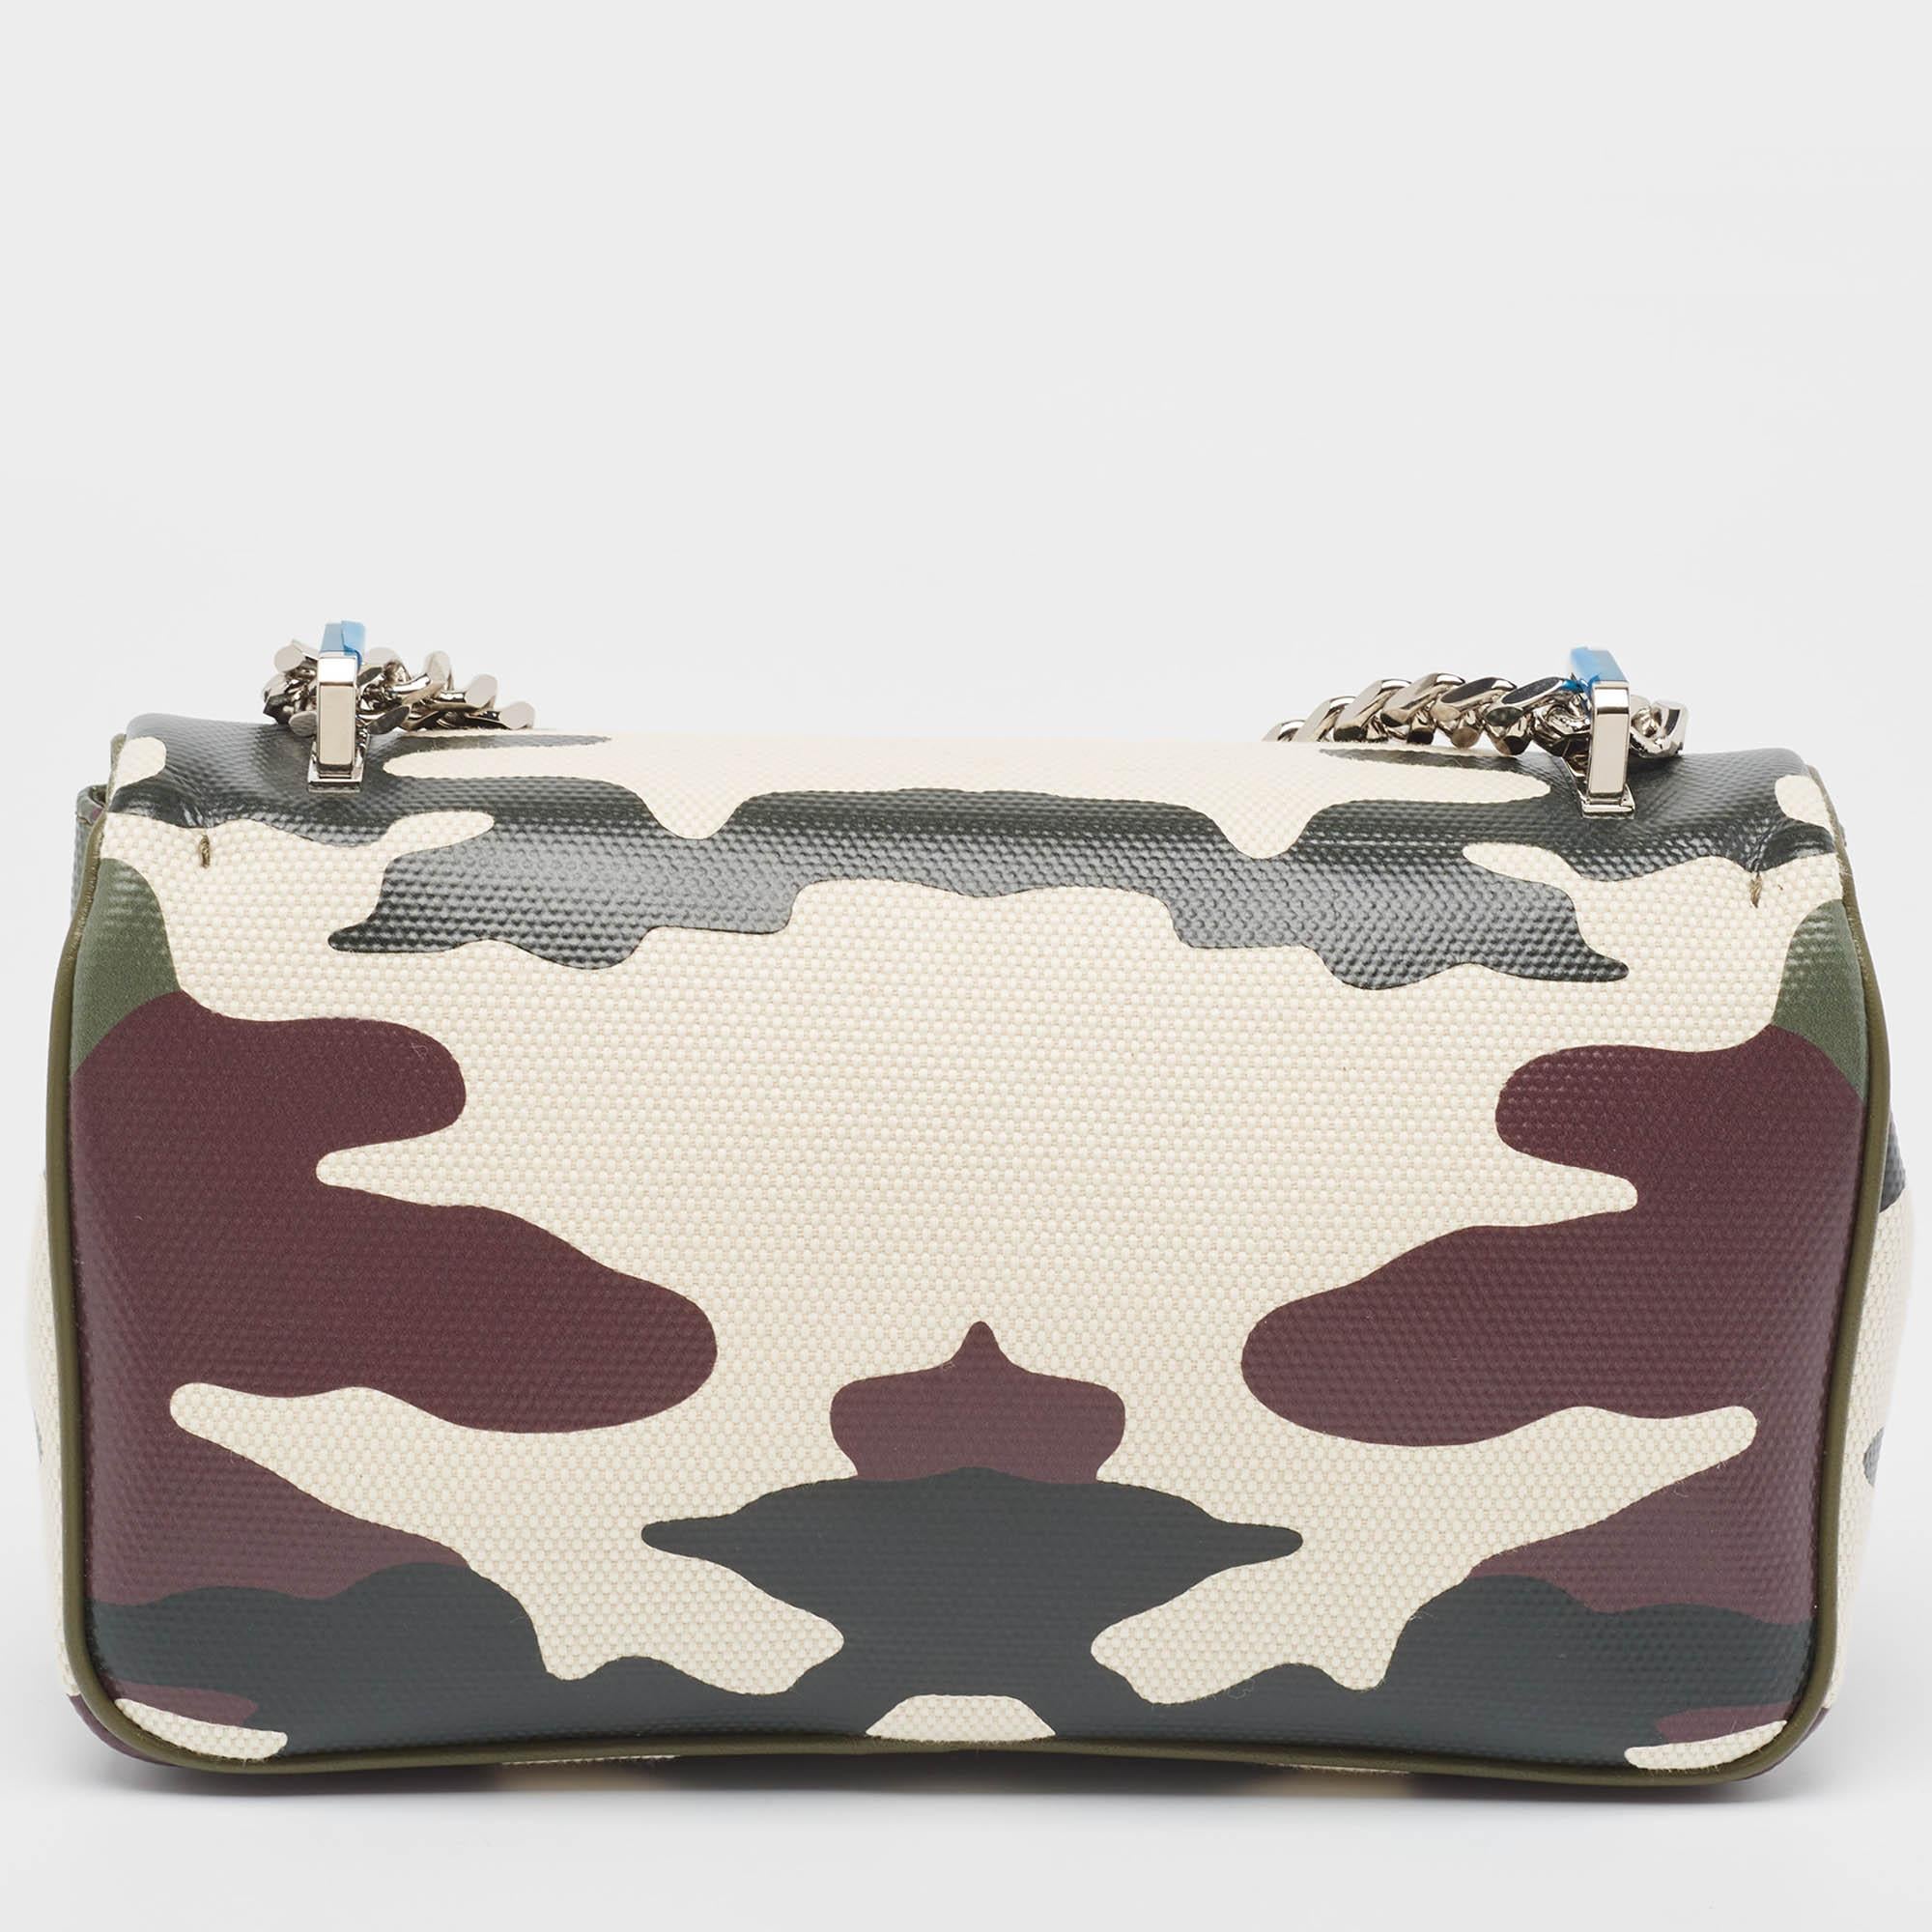 Another marvel designed by Ricardo Tisci for Burberry, Lola is considered the little sister of the TB bag. It is named after the iconic song ‘Lola’ by 1960s British rock band, The Kinks. Introduced in the Autumn/Winter 2019 collection, Lola is